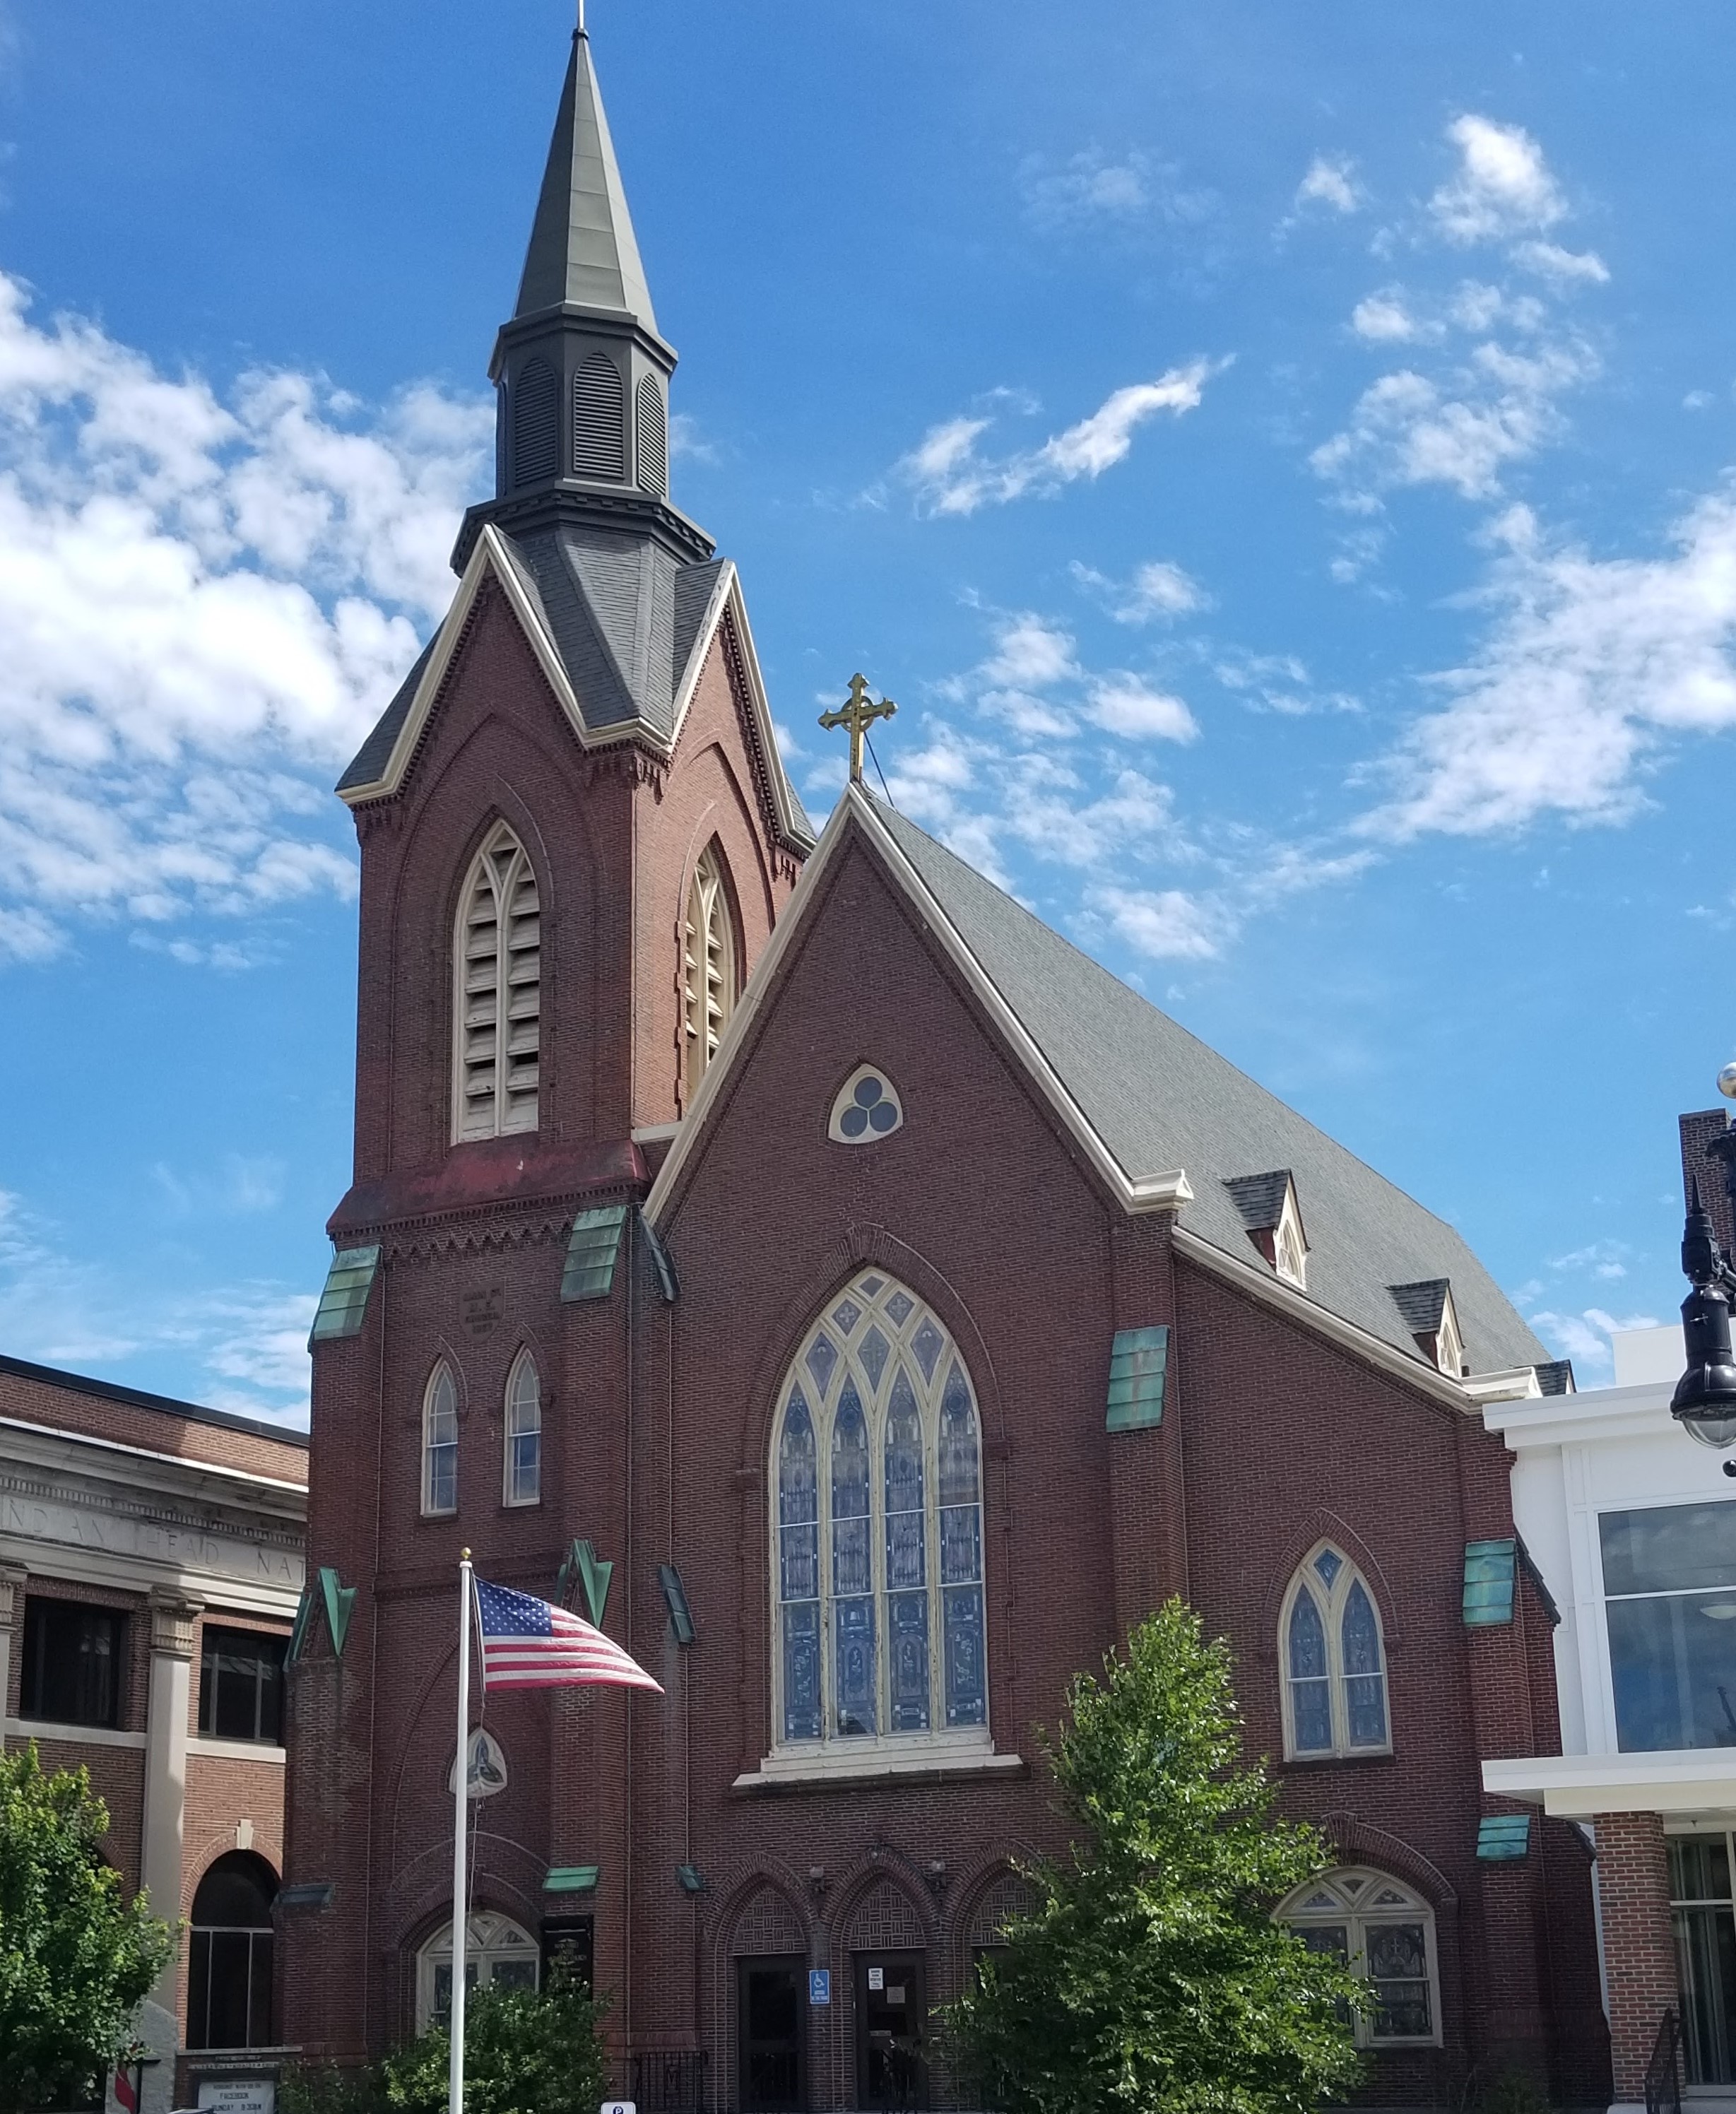 This is a photo of a Nashua, New Hampshire church. The church has a brick exterior, with one tall steeple and one main building. The windows have cream paneling and stained glass. The US flag is at full mast outside the church. The photo is taken from the ground perspective, so the mostly blue, slightly cloudy sky is visible behind the church. This photo is featured by New Hampshire personal injury law firm Buckley Law Offices.